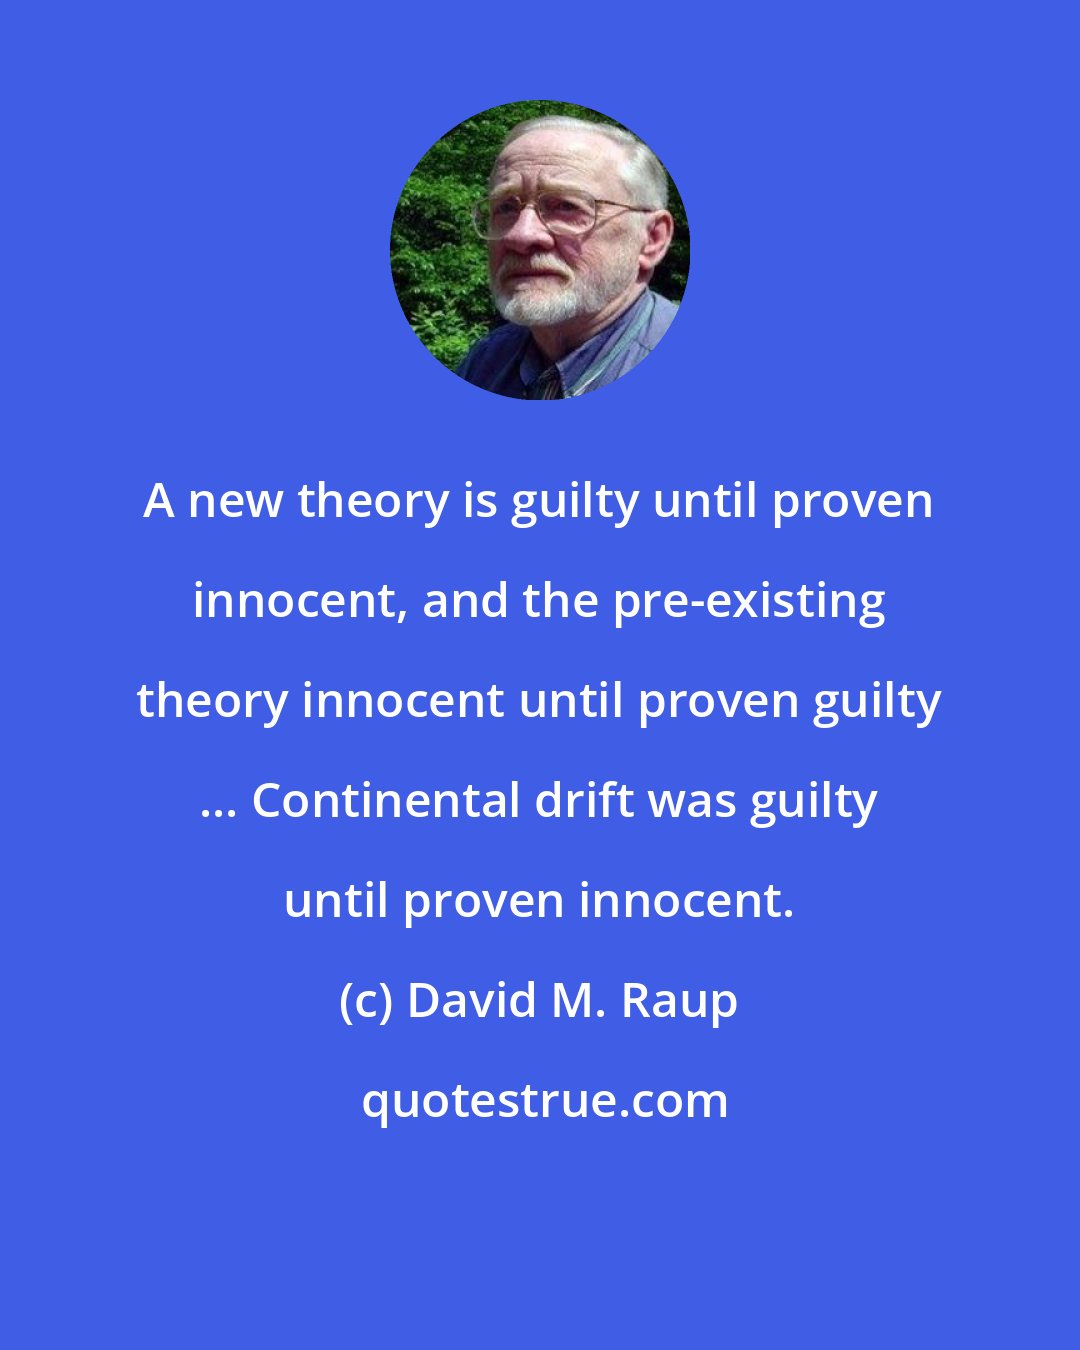 David M. Raup: A new theory is guilty until proven innocent, and the pre-existing theory innocent until proven guilty ... Continental drift was guilty until proven innocent.